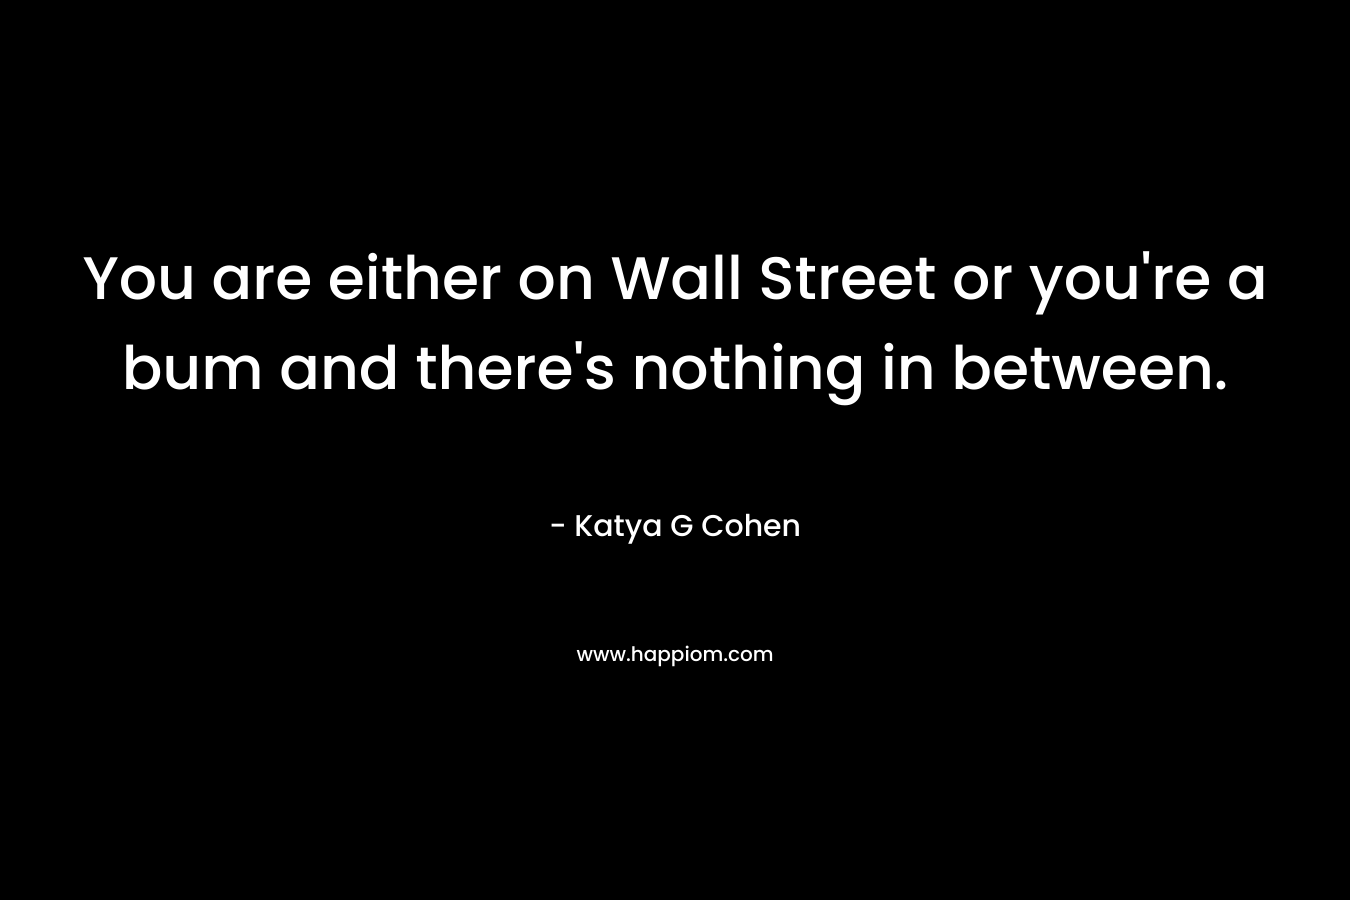 You are either on Wall Street or you're a bum and there's nothing in between.